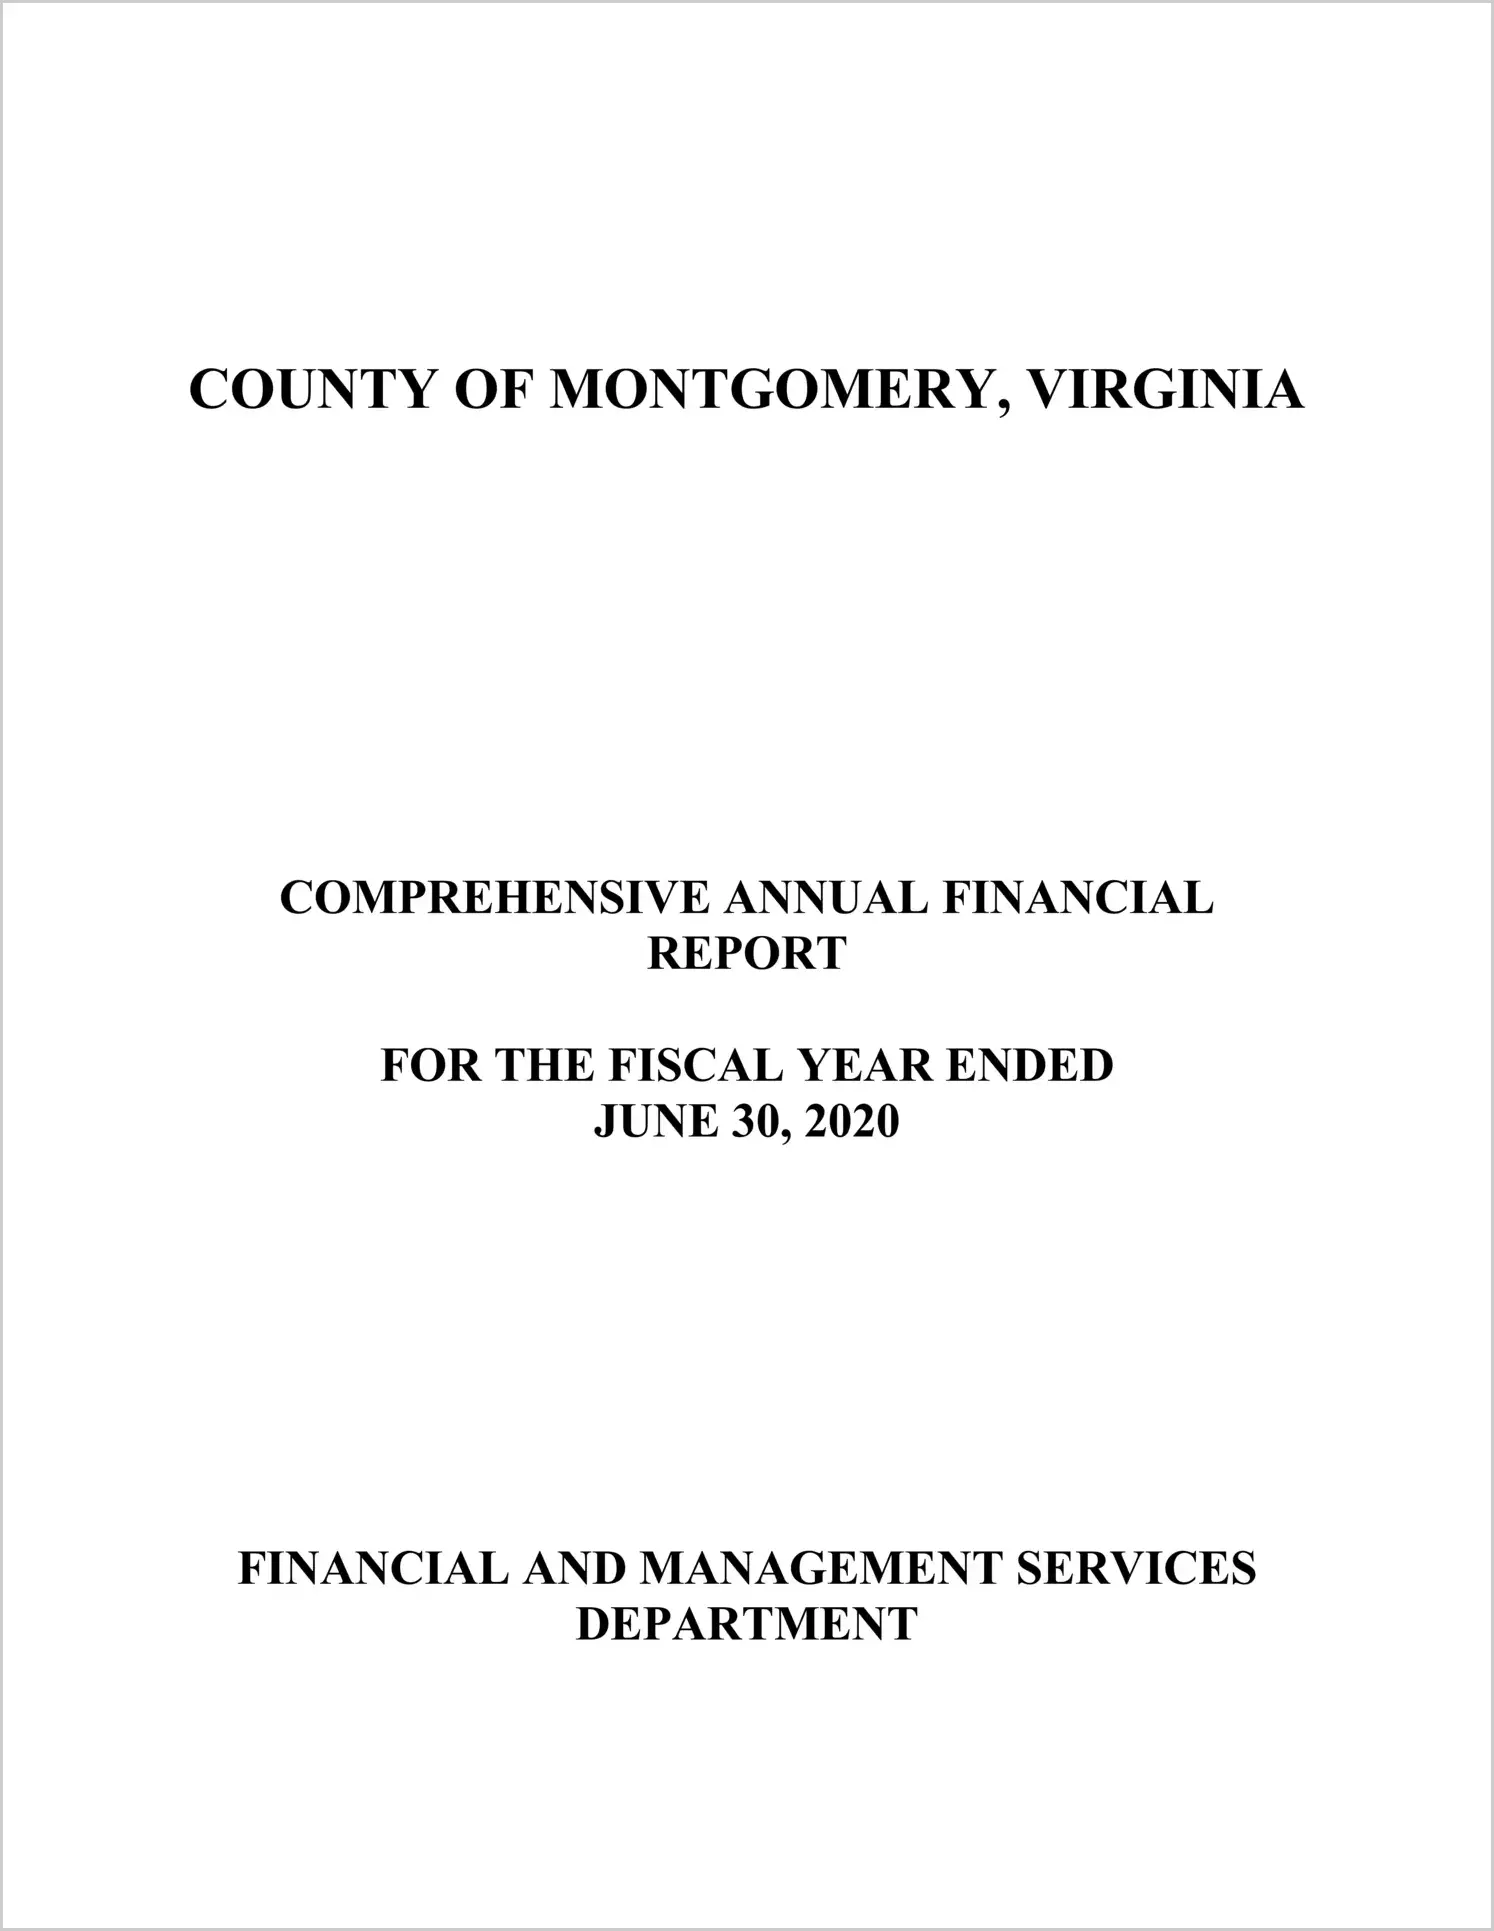 2020 Annual Financial Report for County of Montgomery